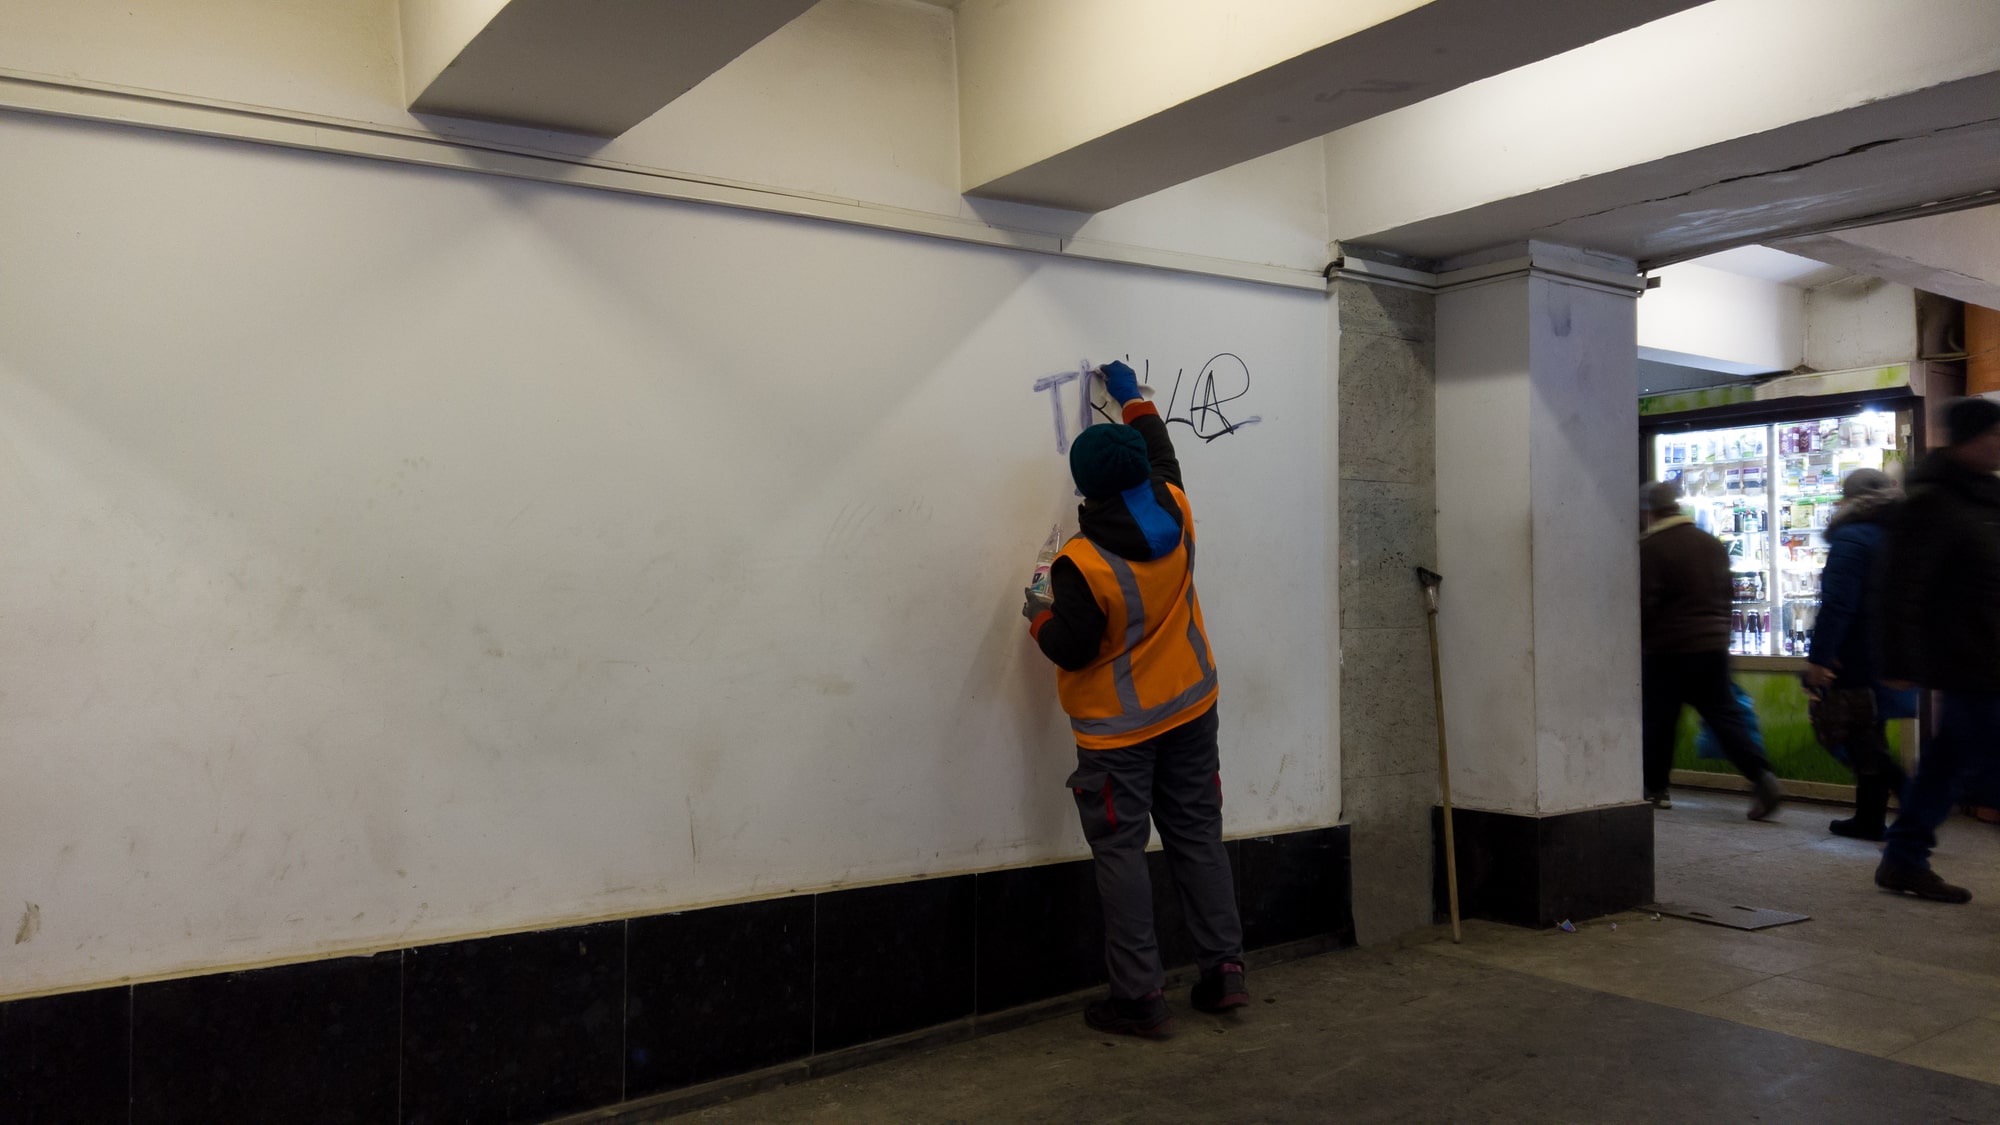 Understanding the Cost of Graffiti and How Commercial Graffiti Removal Services Can Help